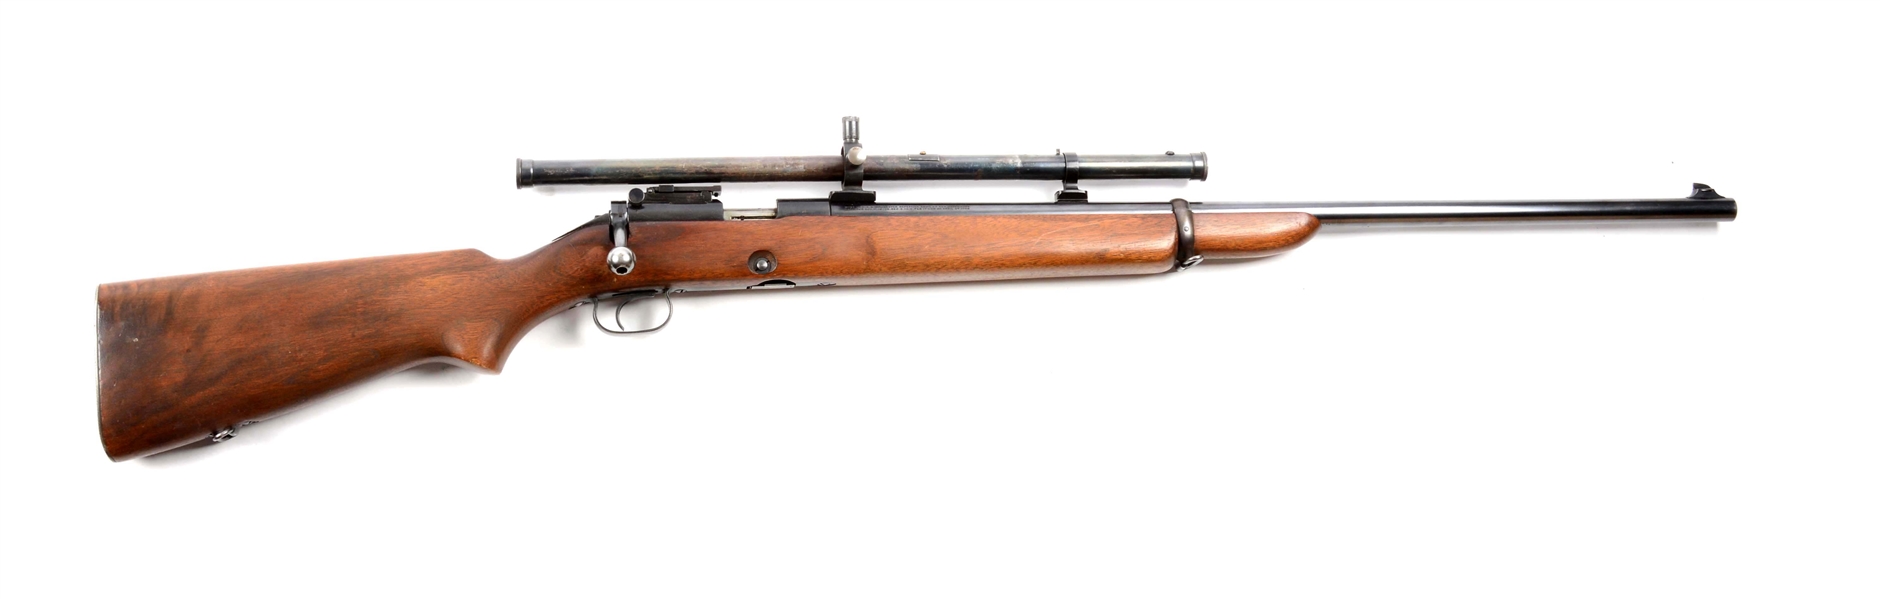 (C) SCOPED WINCHESTER MODEL 52 BOLT ACTION TARGET RIFLE.